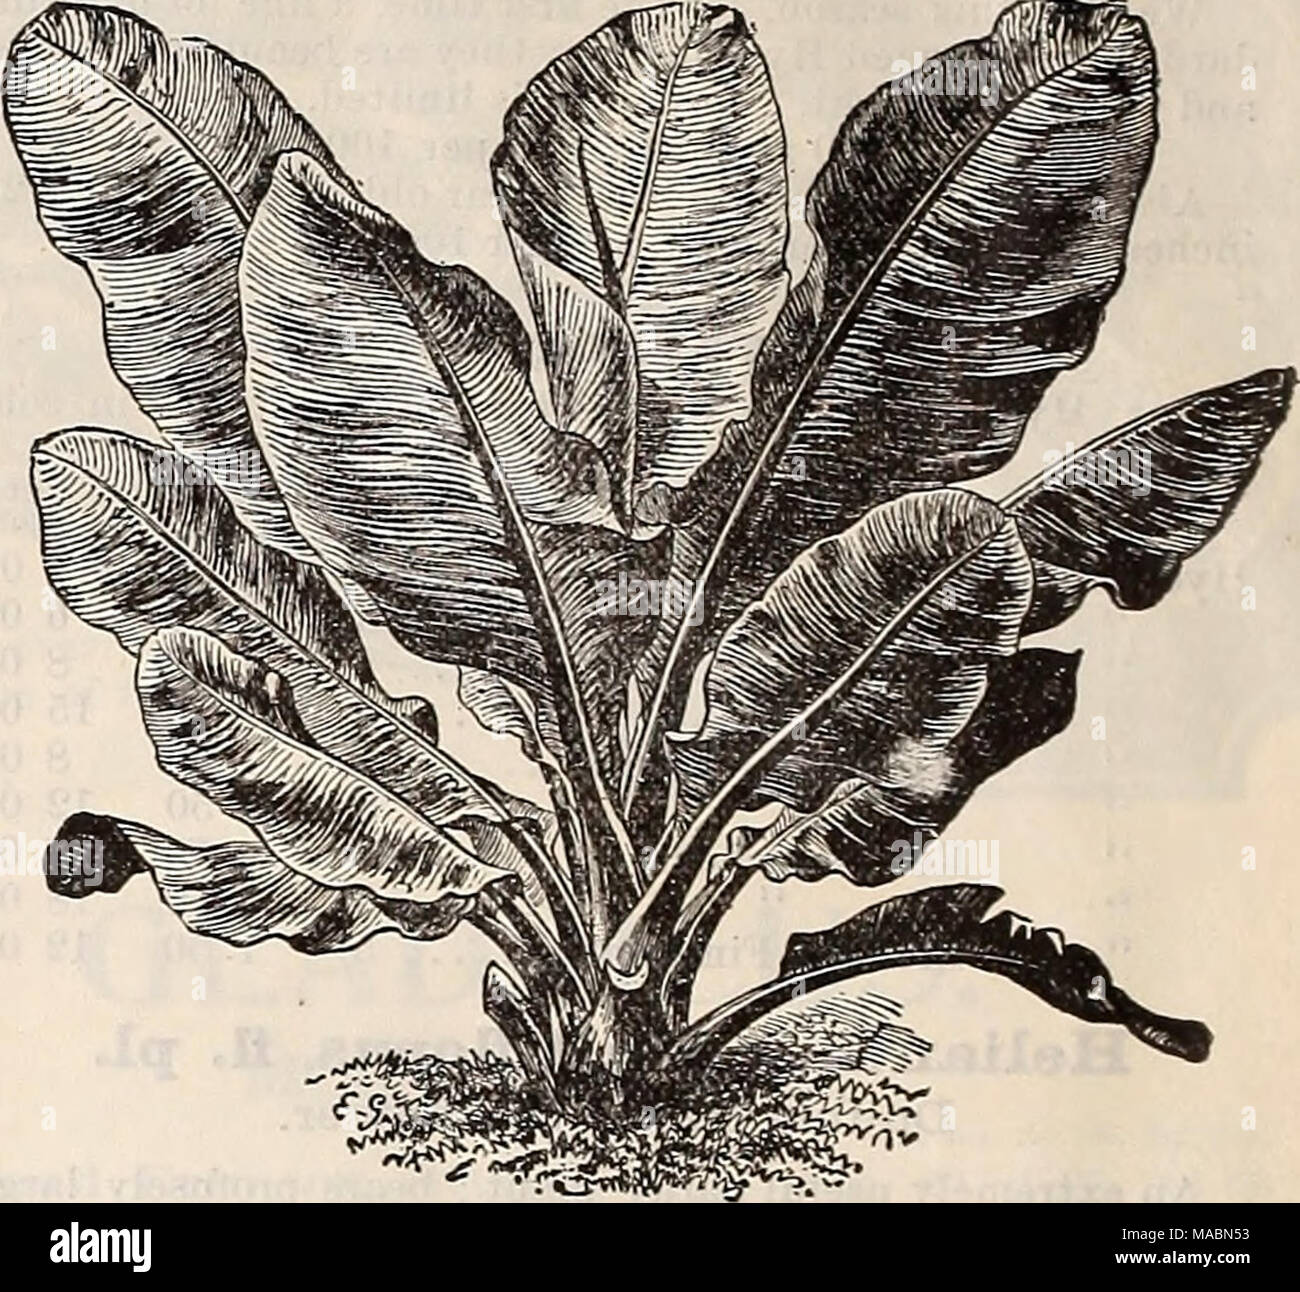 . Dreer's quarterly wholesale price list of seeds, plants &amp;c. : winter edition January 1896 March . Musa Ensete. Mnsa Ensete. Abyssinian Banana. The leaves of this magnificent plant are long, broad and massive, of a beautiful green, with a broad crimson midrib ; the plant grows luxuriantly from 8 to 12 feet high, producing a tropical effect. Strong 5 inch pots, 50 cents each. Otaheite Orange. We offer a fine lot of these in strong plants, which should fruit freely the coming season. Strong 4 inch pots, $3.50 per doz. &quot; 5 inch pots, $5.00 per doz. &quot; 6 inch pots, $10.00 per doz. Pa Stock Photo